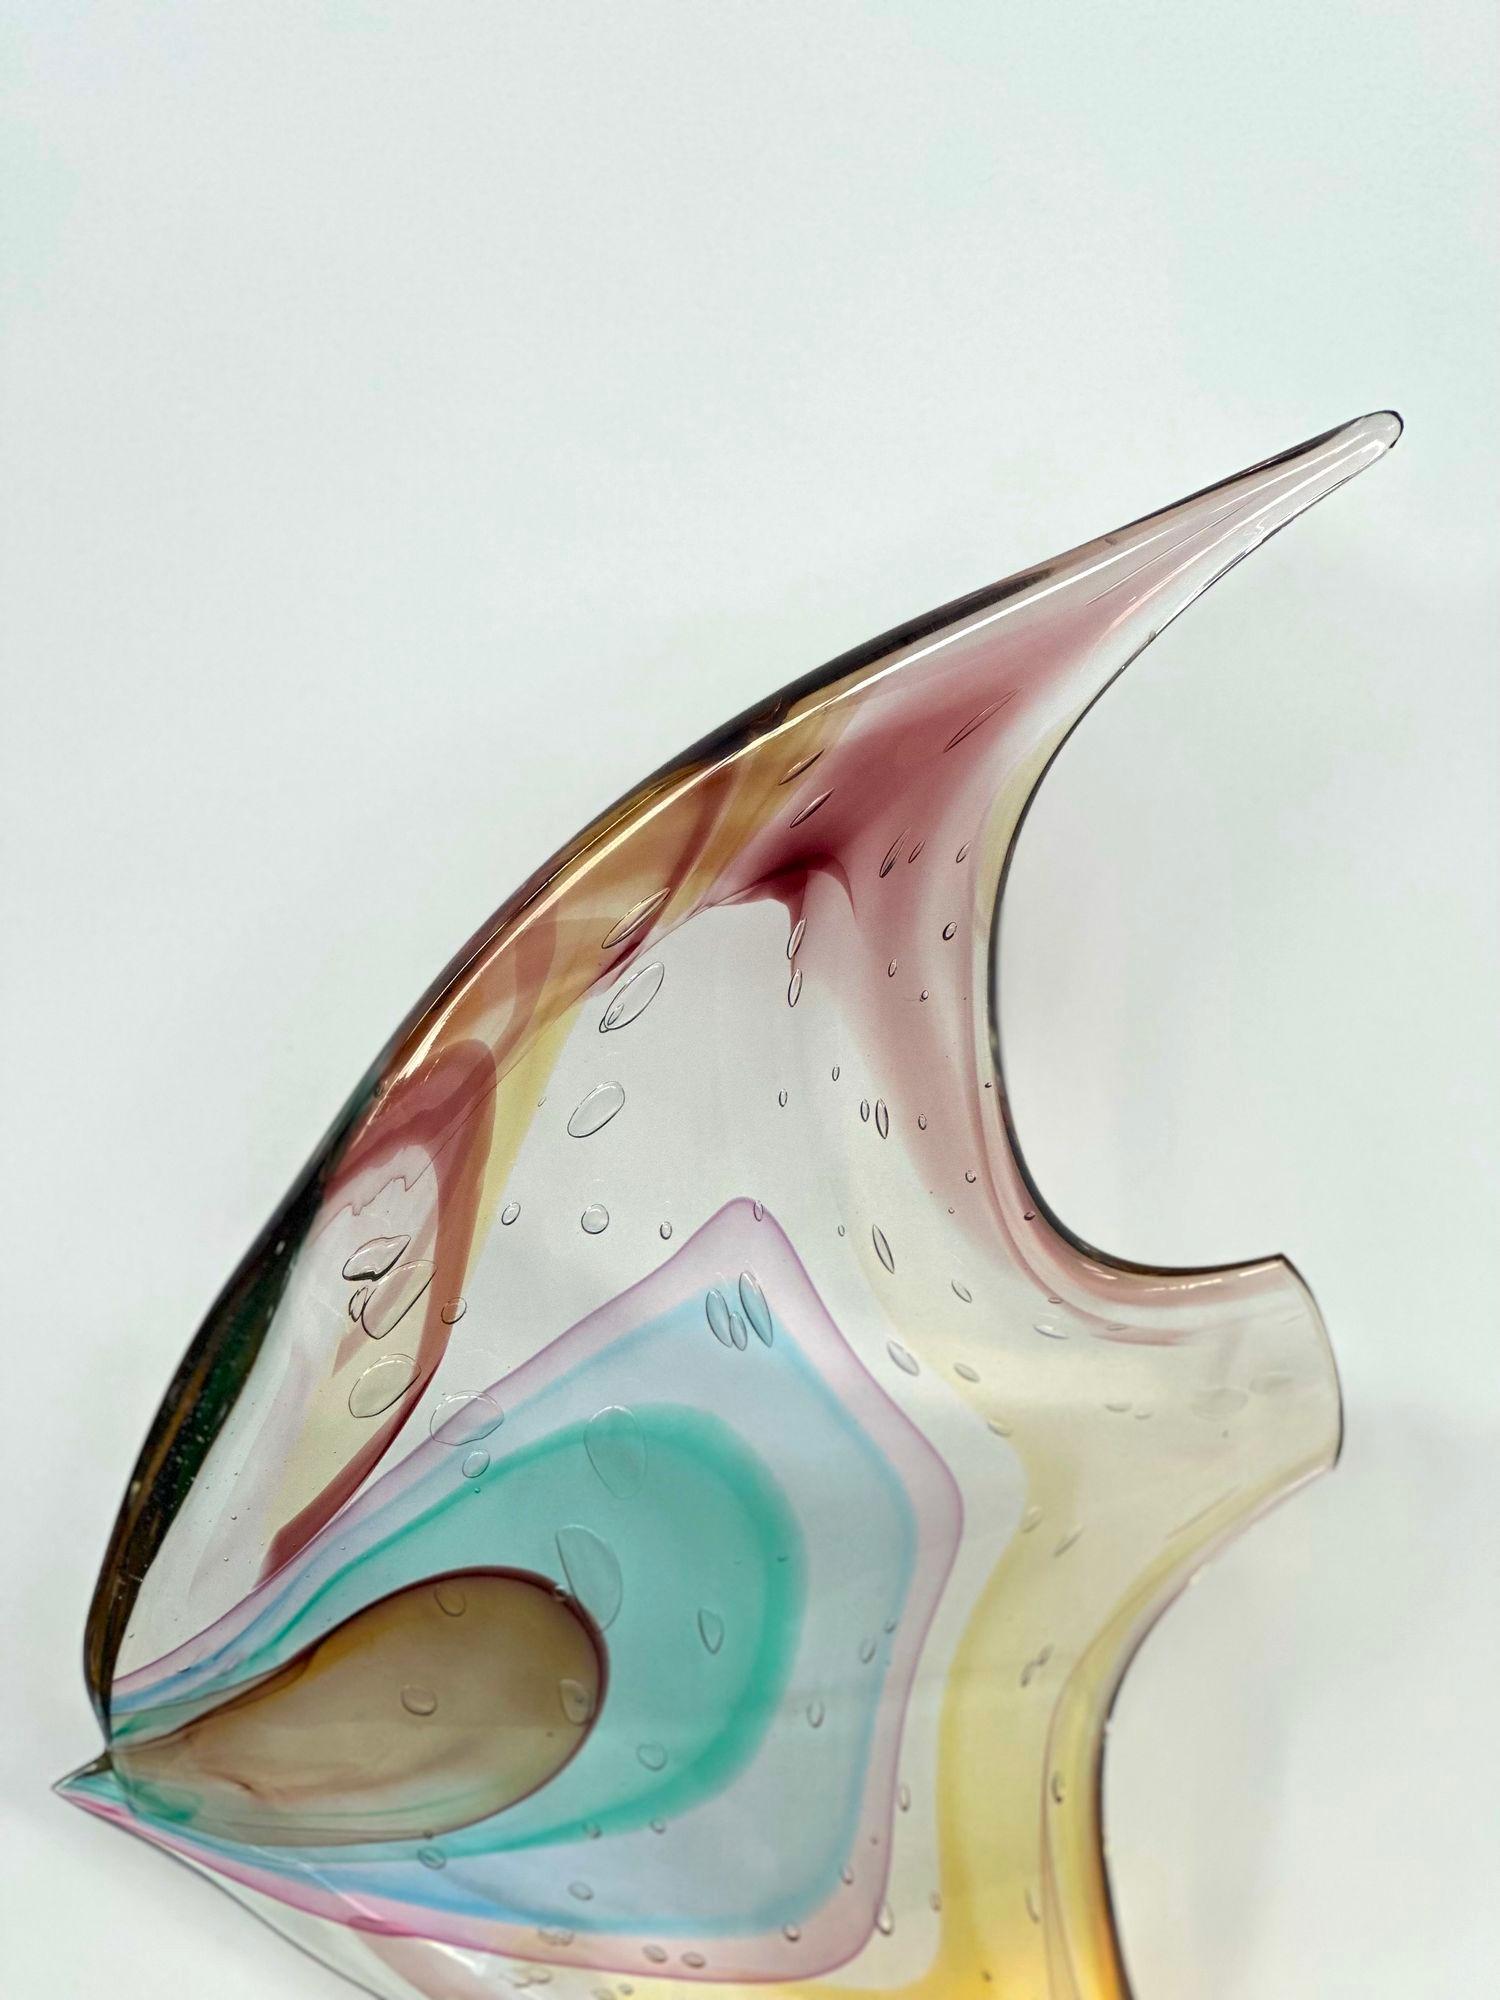 Murano glass fish sculpture by Sergio Costantini for Vetro Artistico Murano with amber, blue, lilac, and pink tones. 
Made in Italy, 20th century (Includes sticker and signature).
Dimensions:
18.25